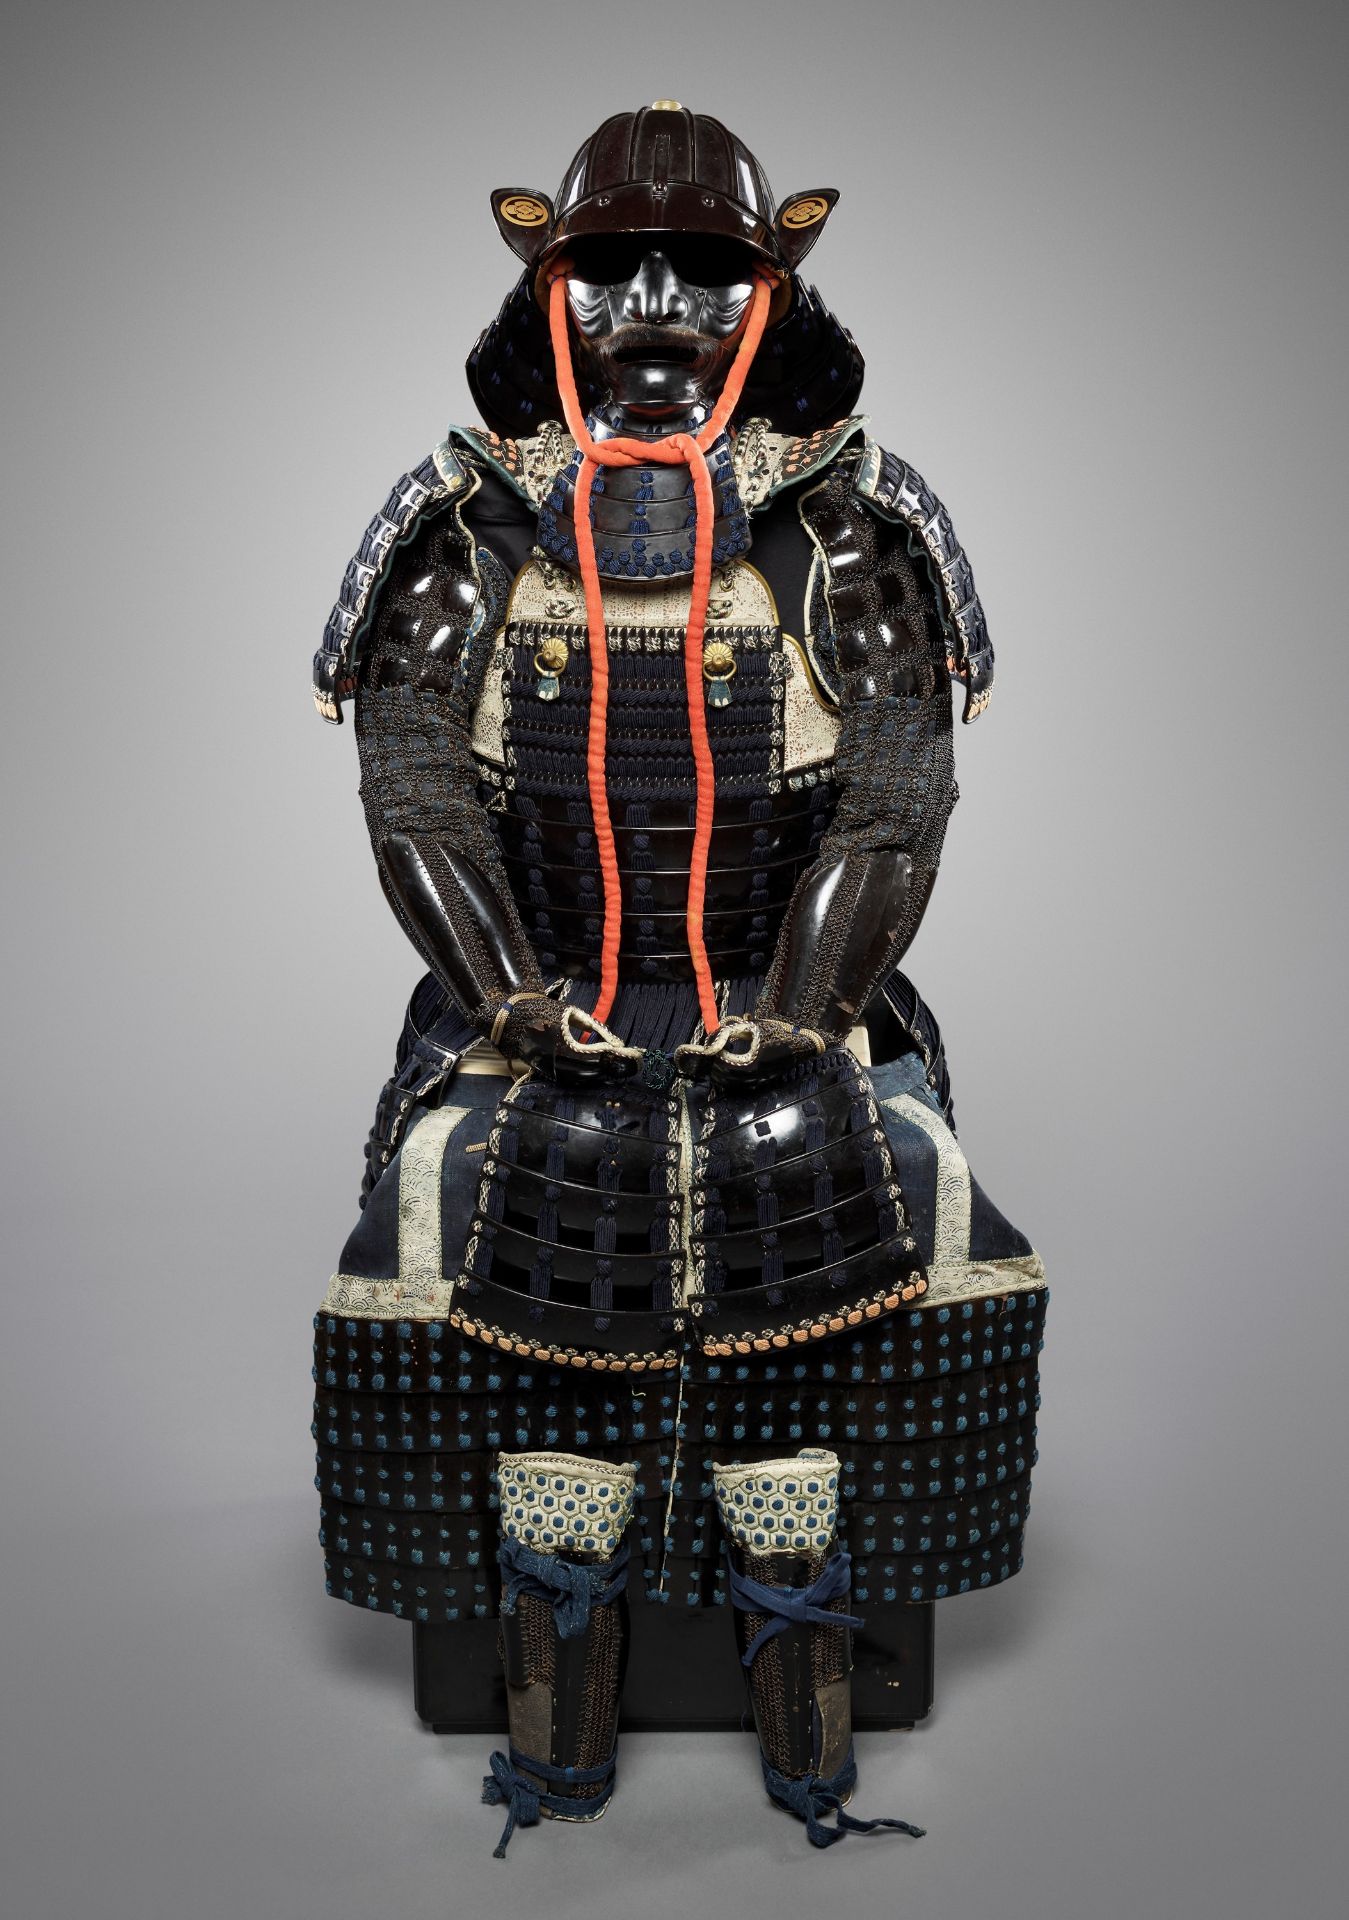 A SUIT OF ARMOR WITH SUJIBACHI KABUTO